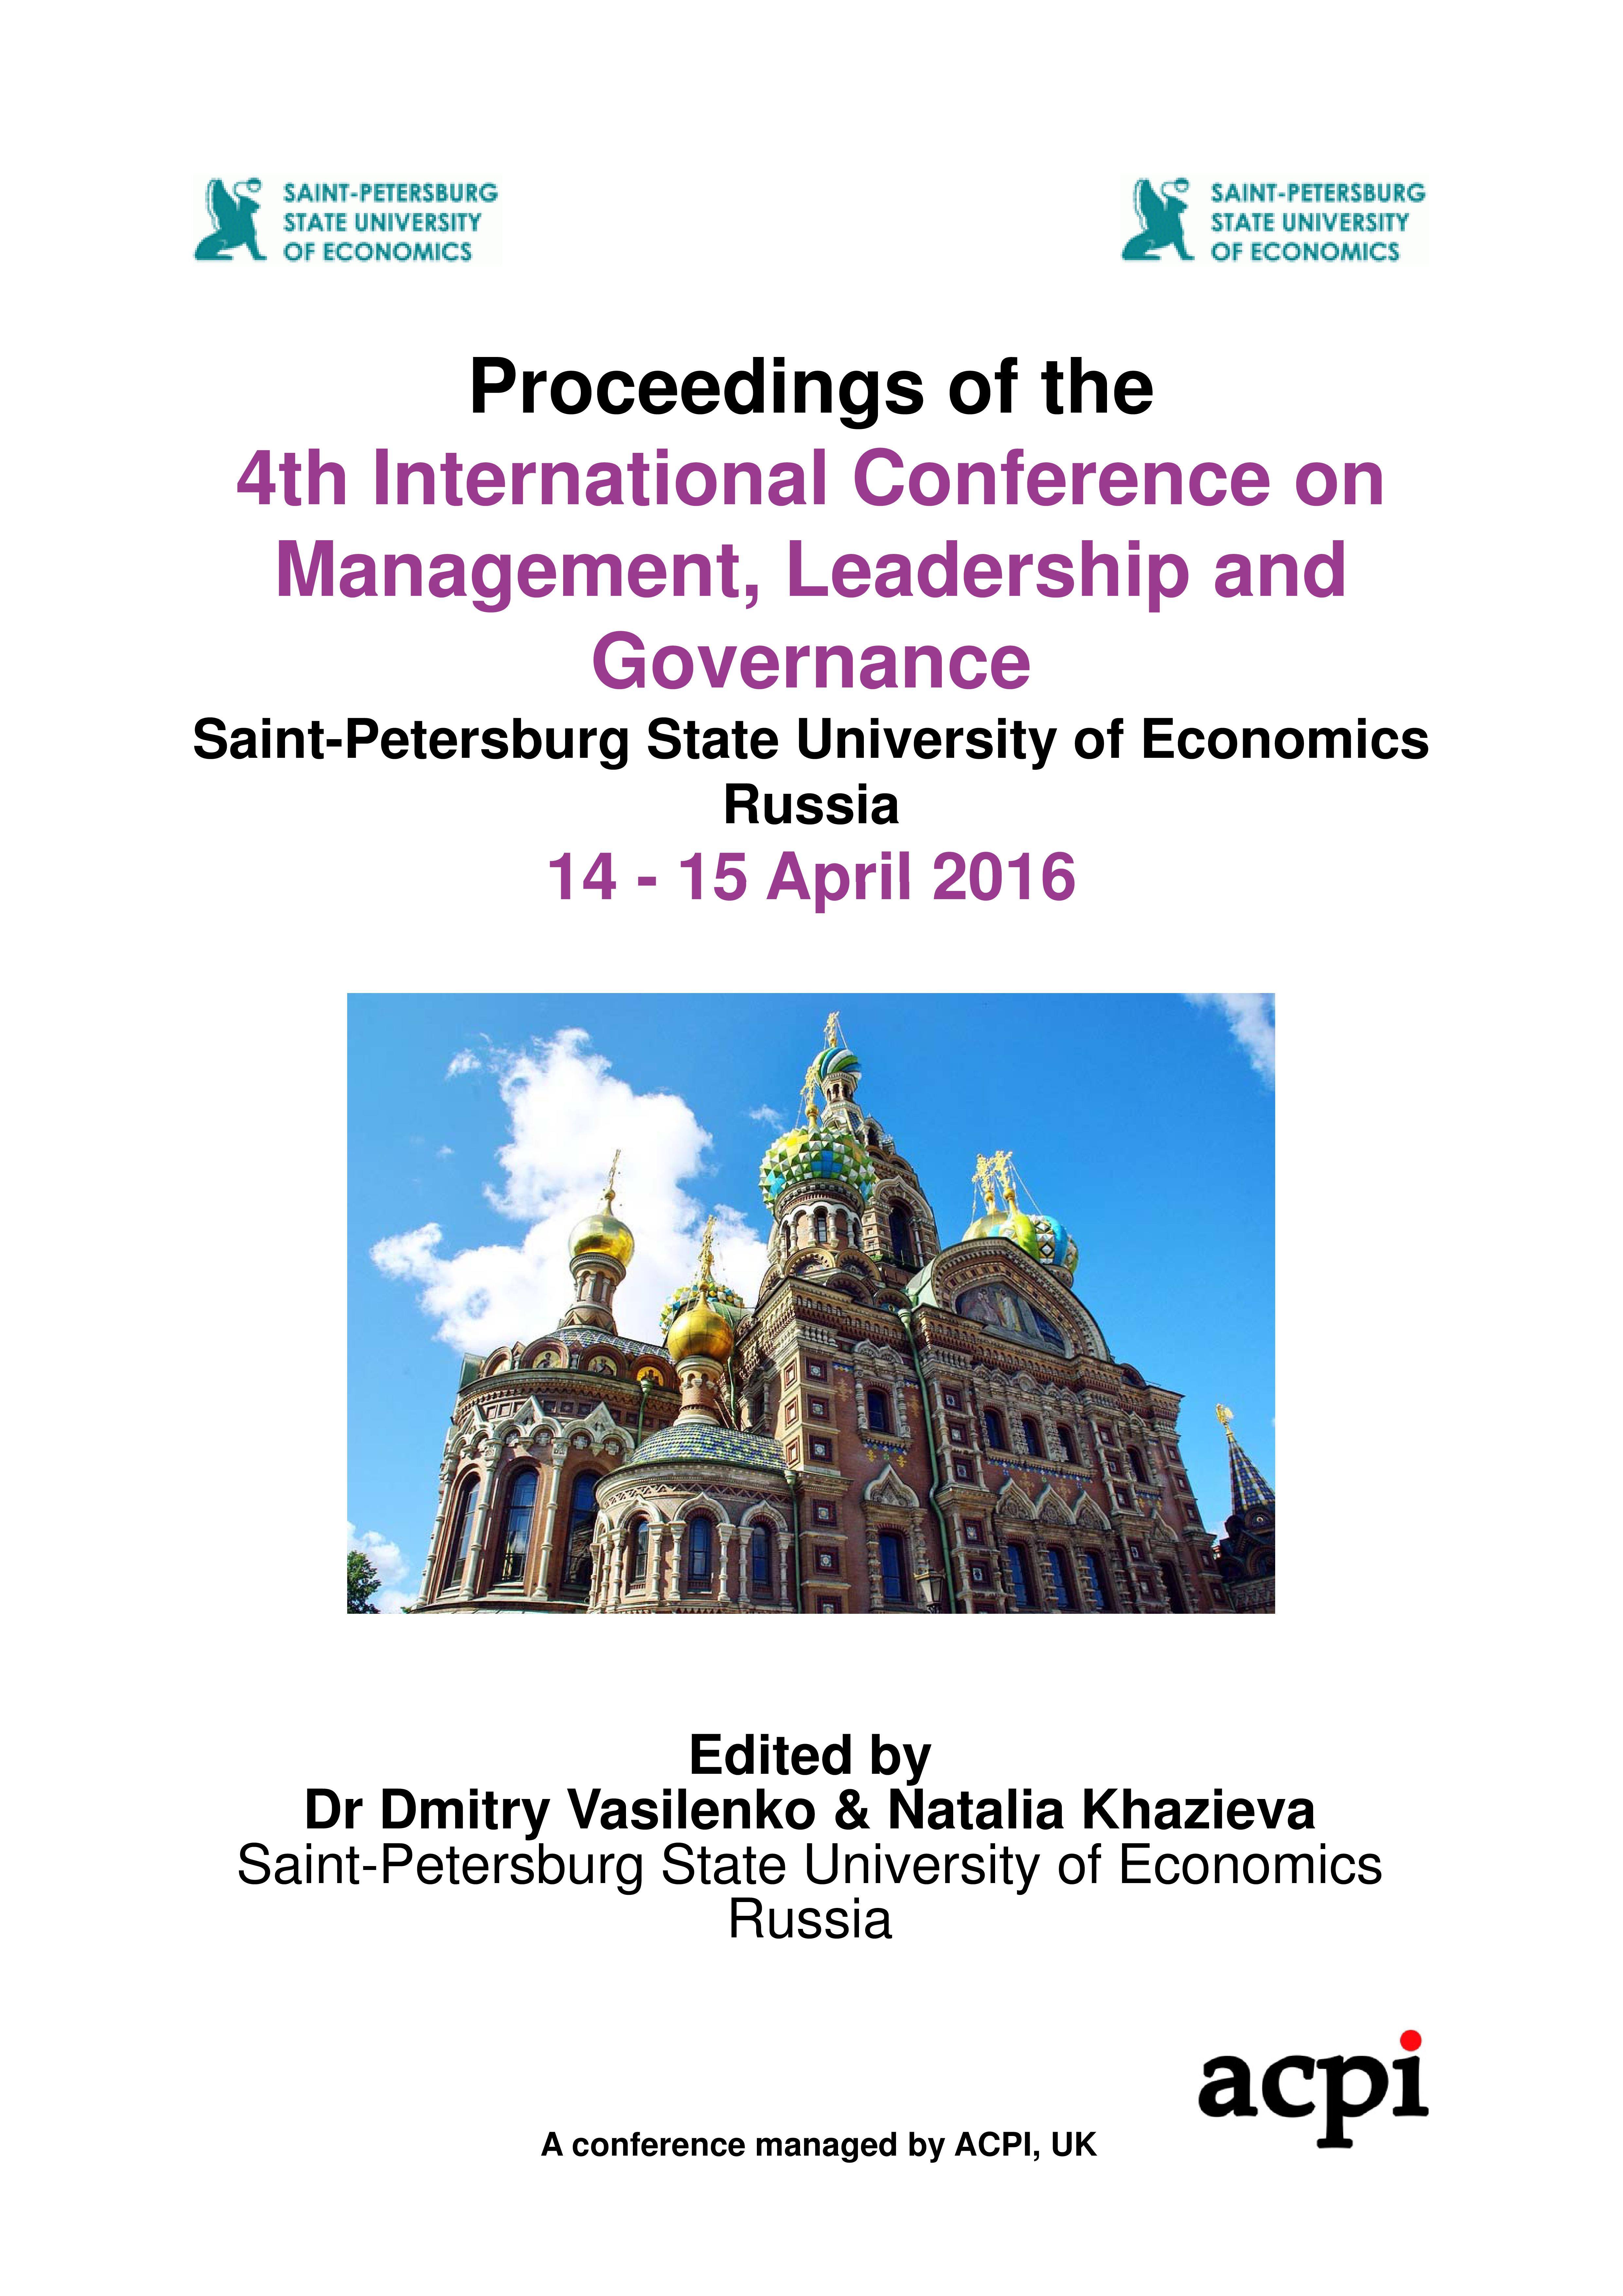 Proceedings of the 4th International Conference on Management, Leadership and Governance – ICMLG 2016, St. Persburg, SPSUE, 14-15 April, 2016